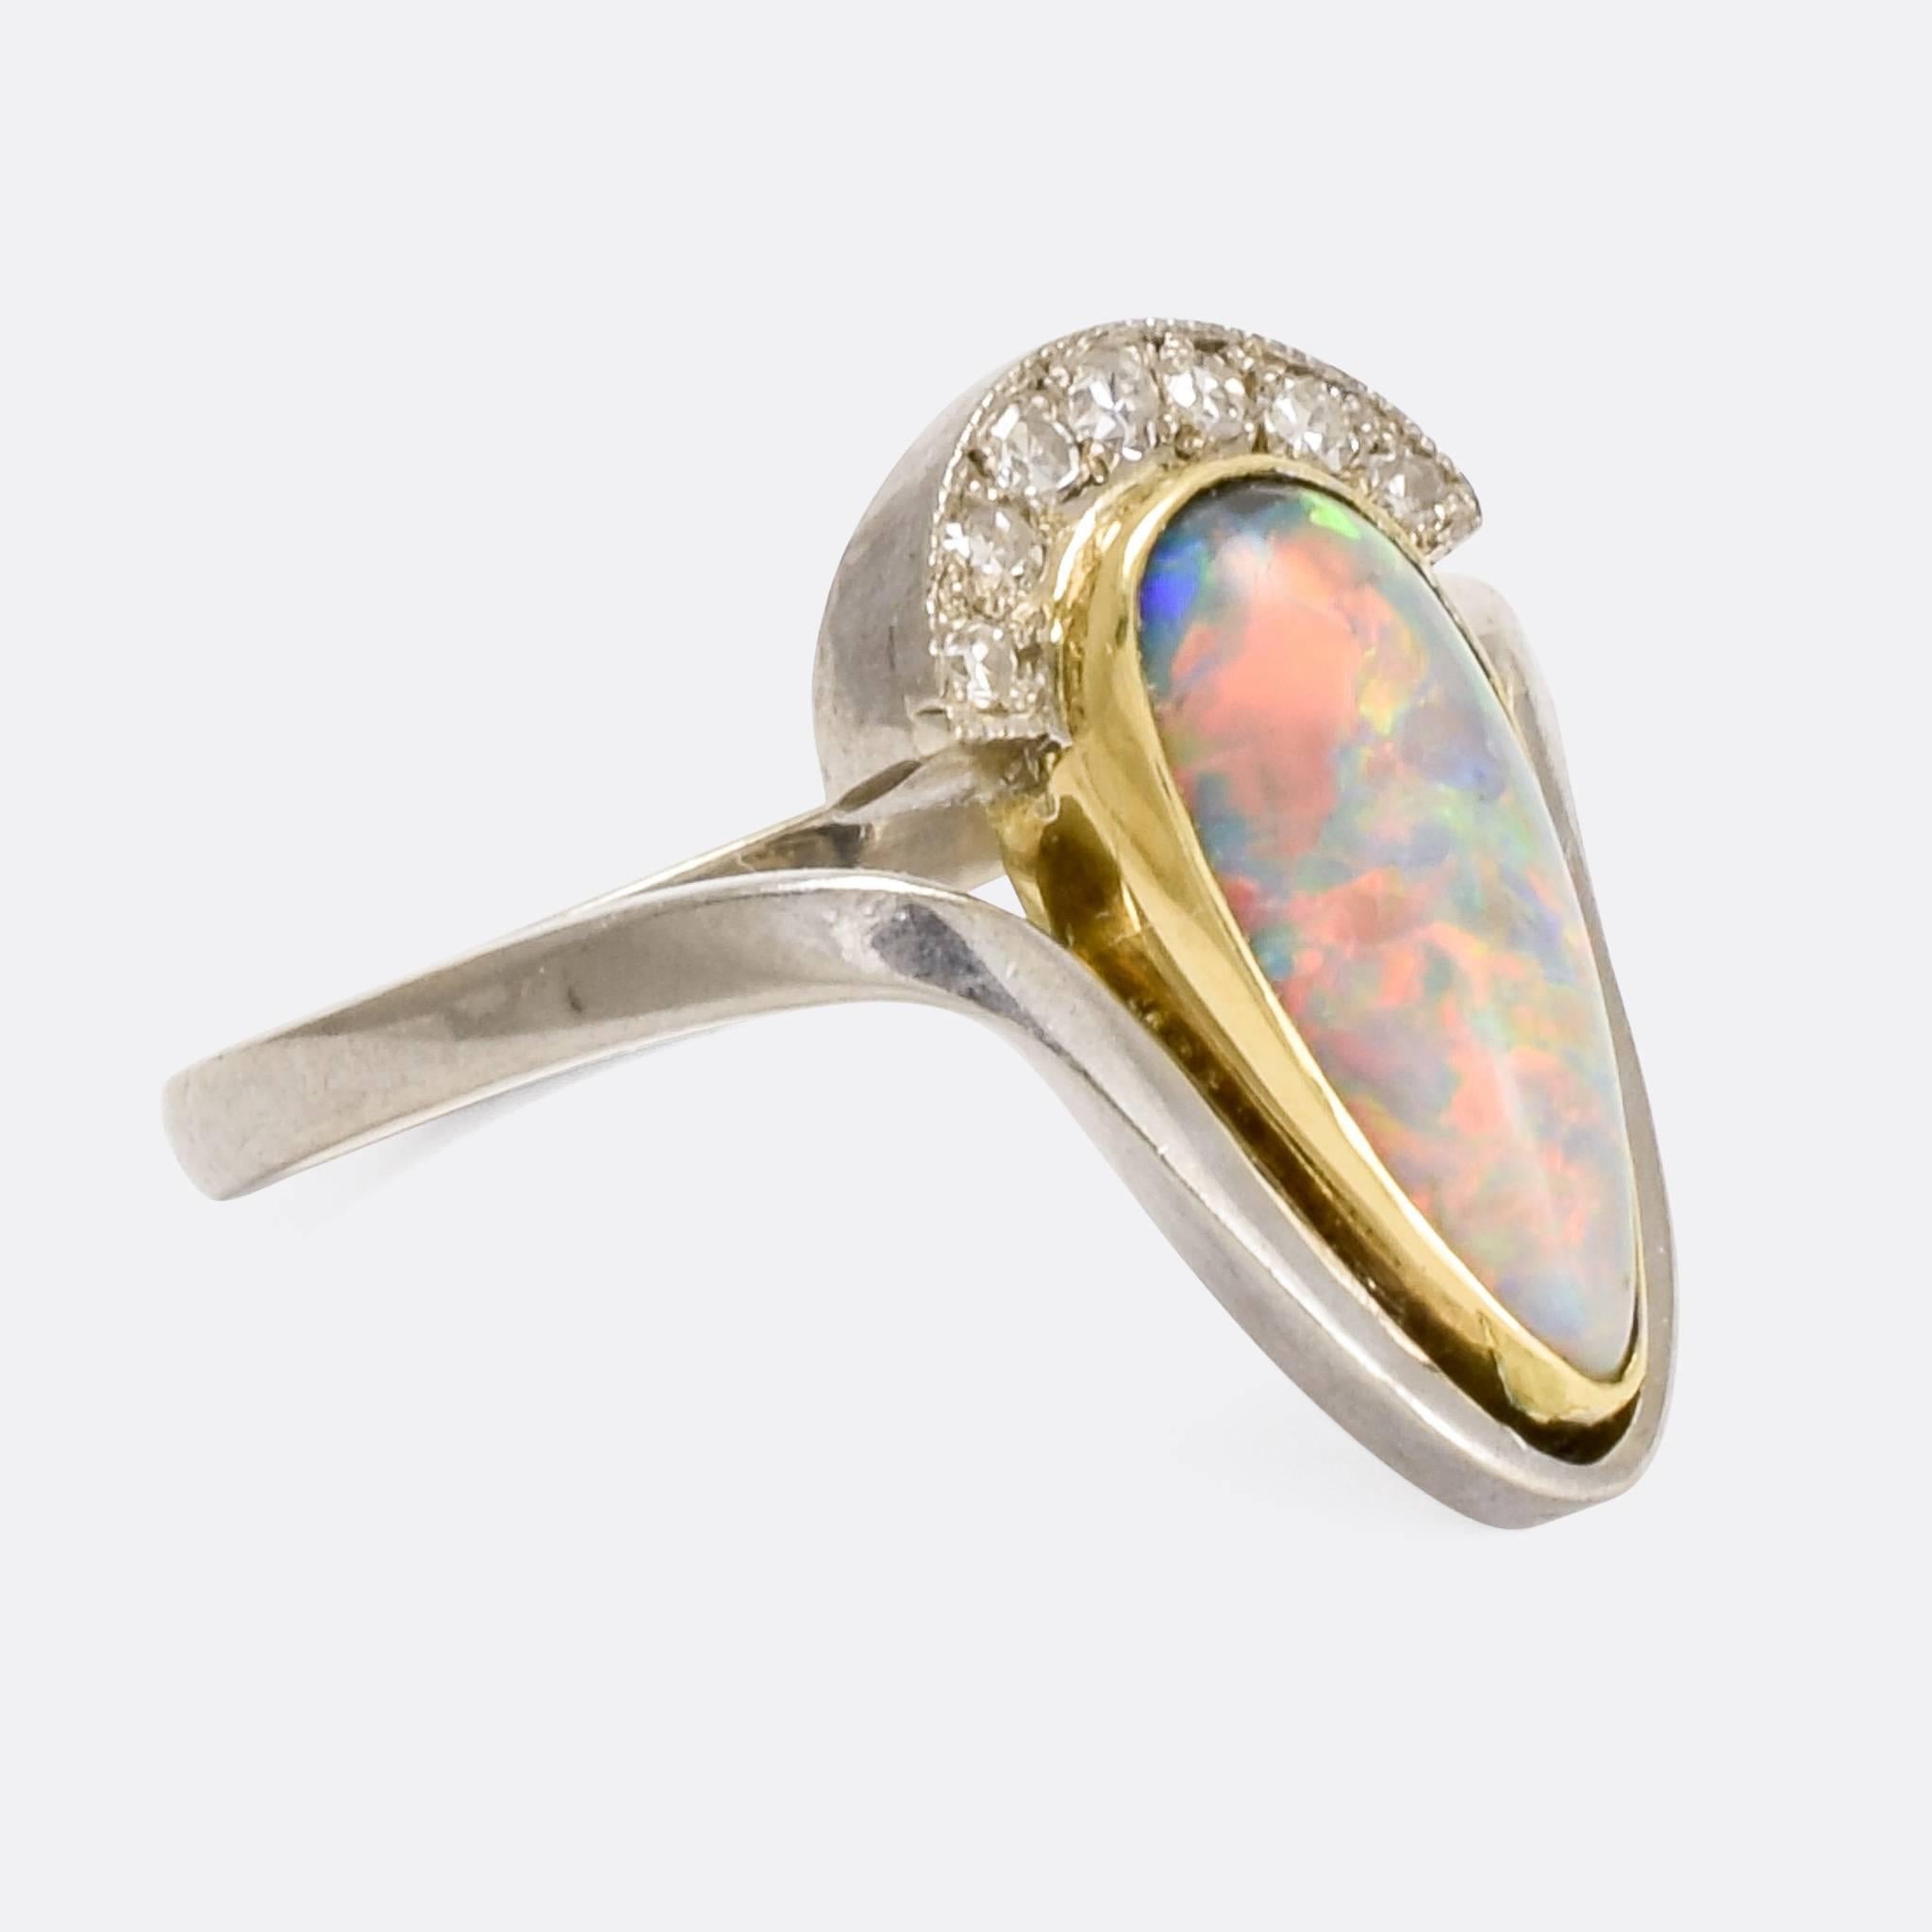 A striking Art Nouveau ring set with a pear-shaped Black Opal with a crown of white diamonds. It was made in England in the early 20th Century, circa 1910, modelled in two-tone 18 karat gold with fine millegrain detailing around the diamonds.